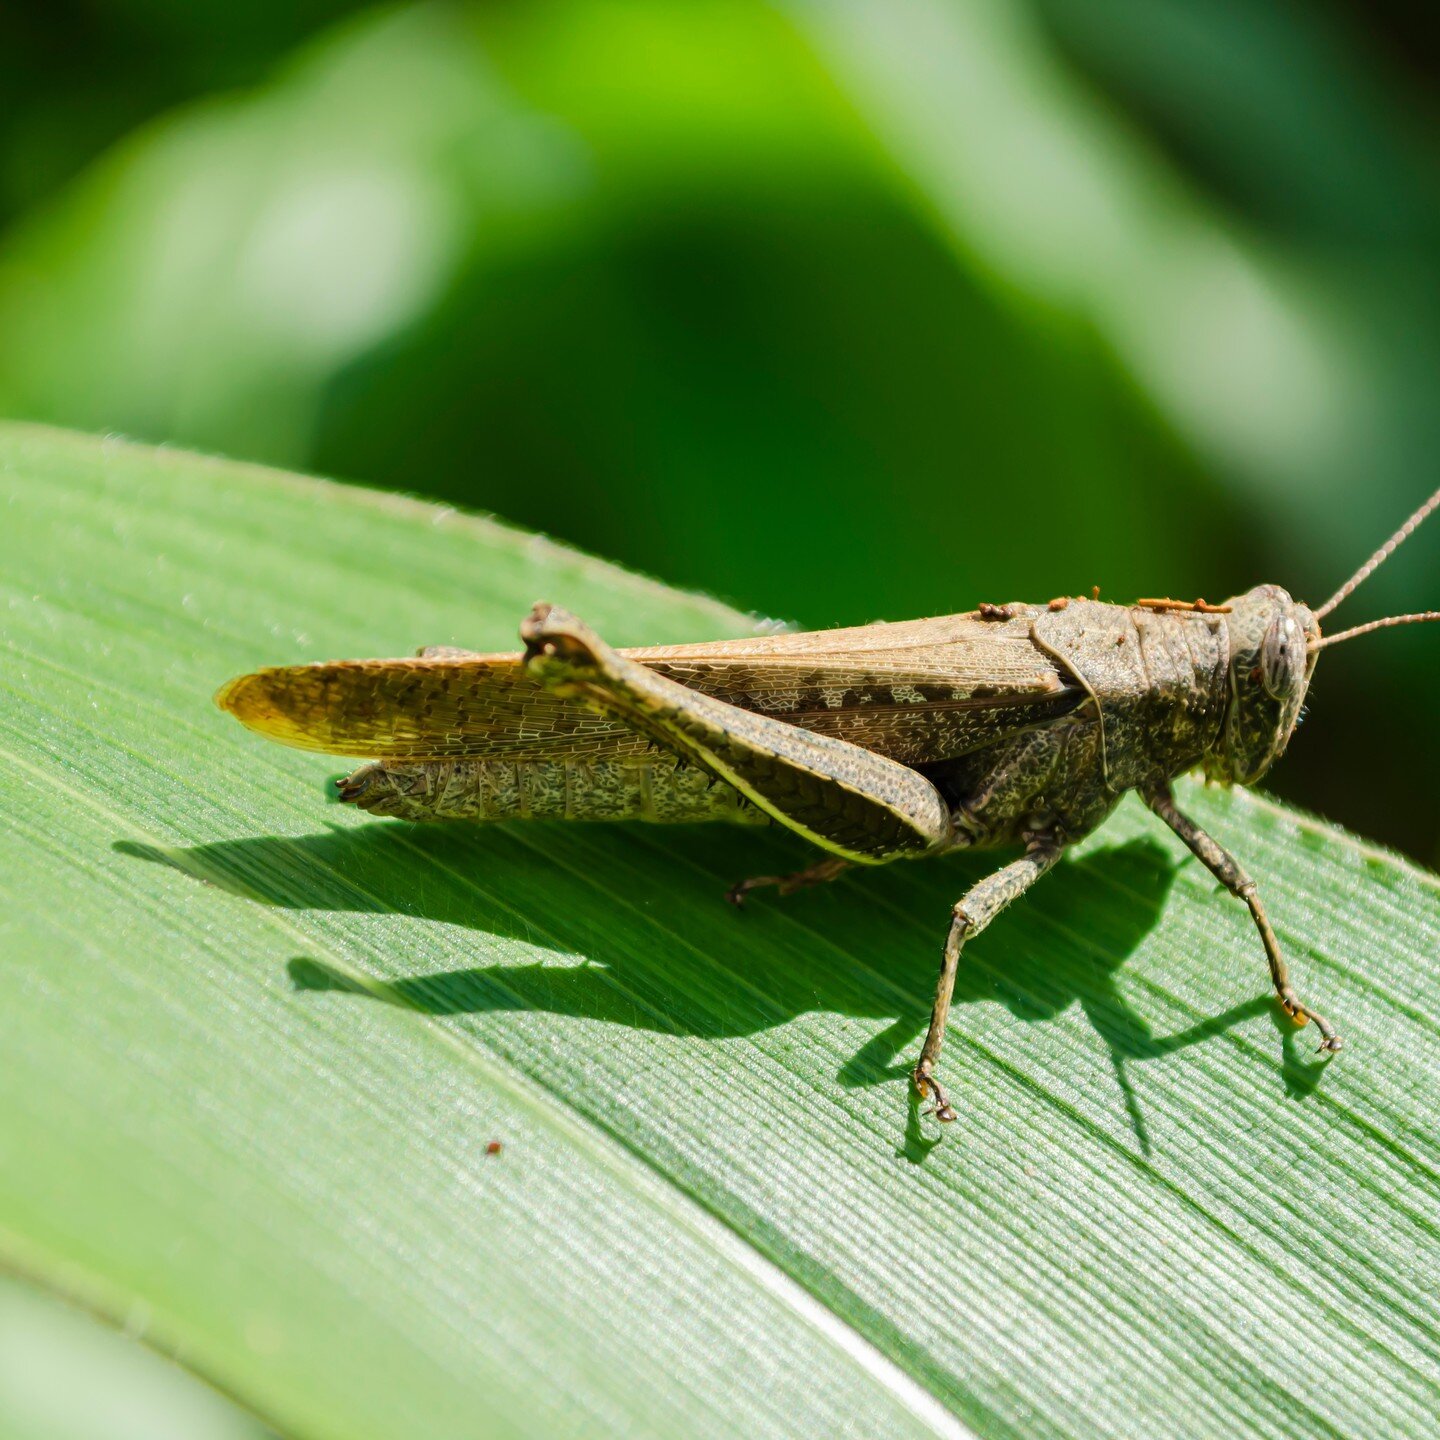 Crickets are earth-angels.

Want to hear what crickets sound like to each other? We hear more quickly than they do, so we just hear a chirp. Follow this link to hear cricket language. Earth-angels indeed! 

https://www.youtube.com/watch?v=OON57EcIbuo